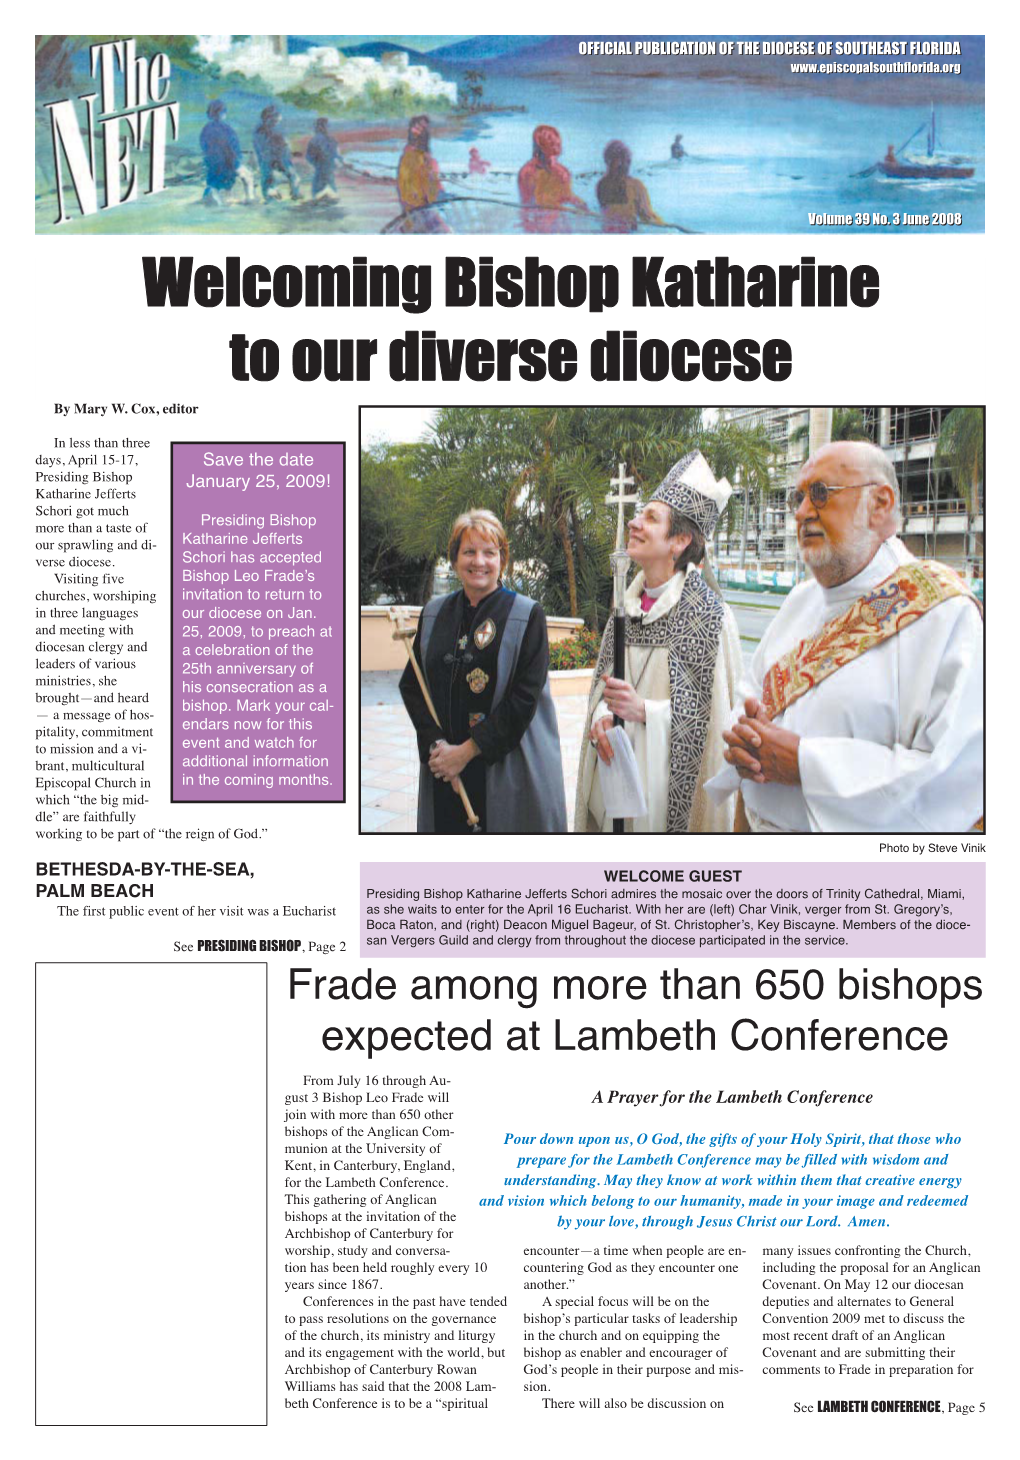 June 2008 Welcoming Bishop Katharine to Our Diverse Diocese